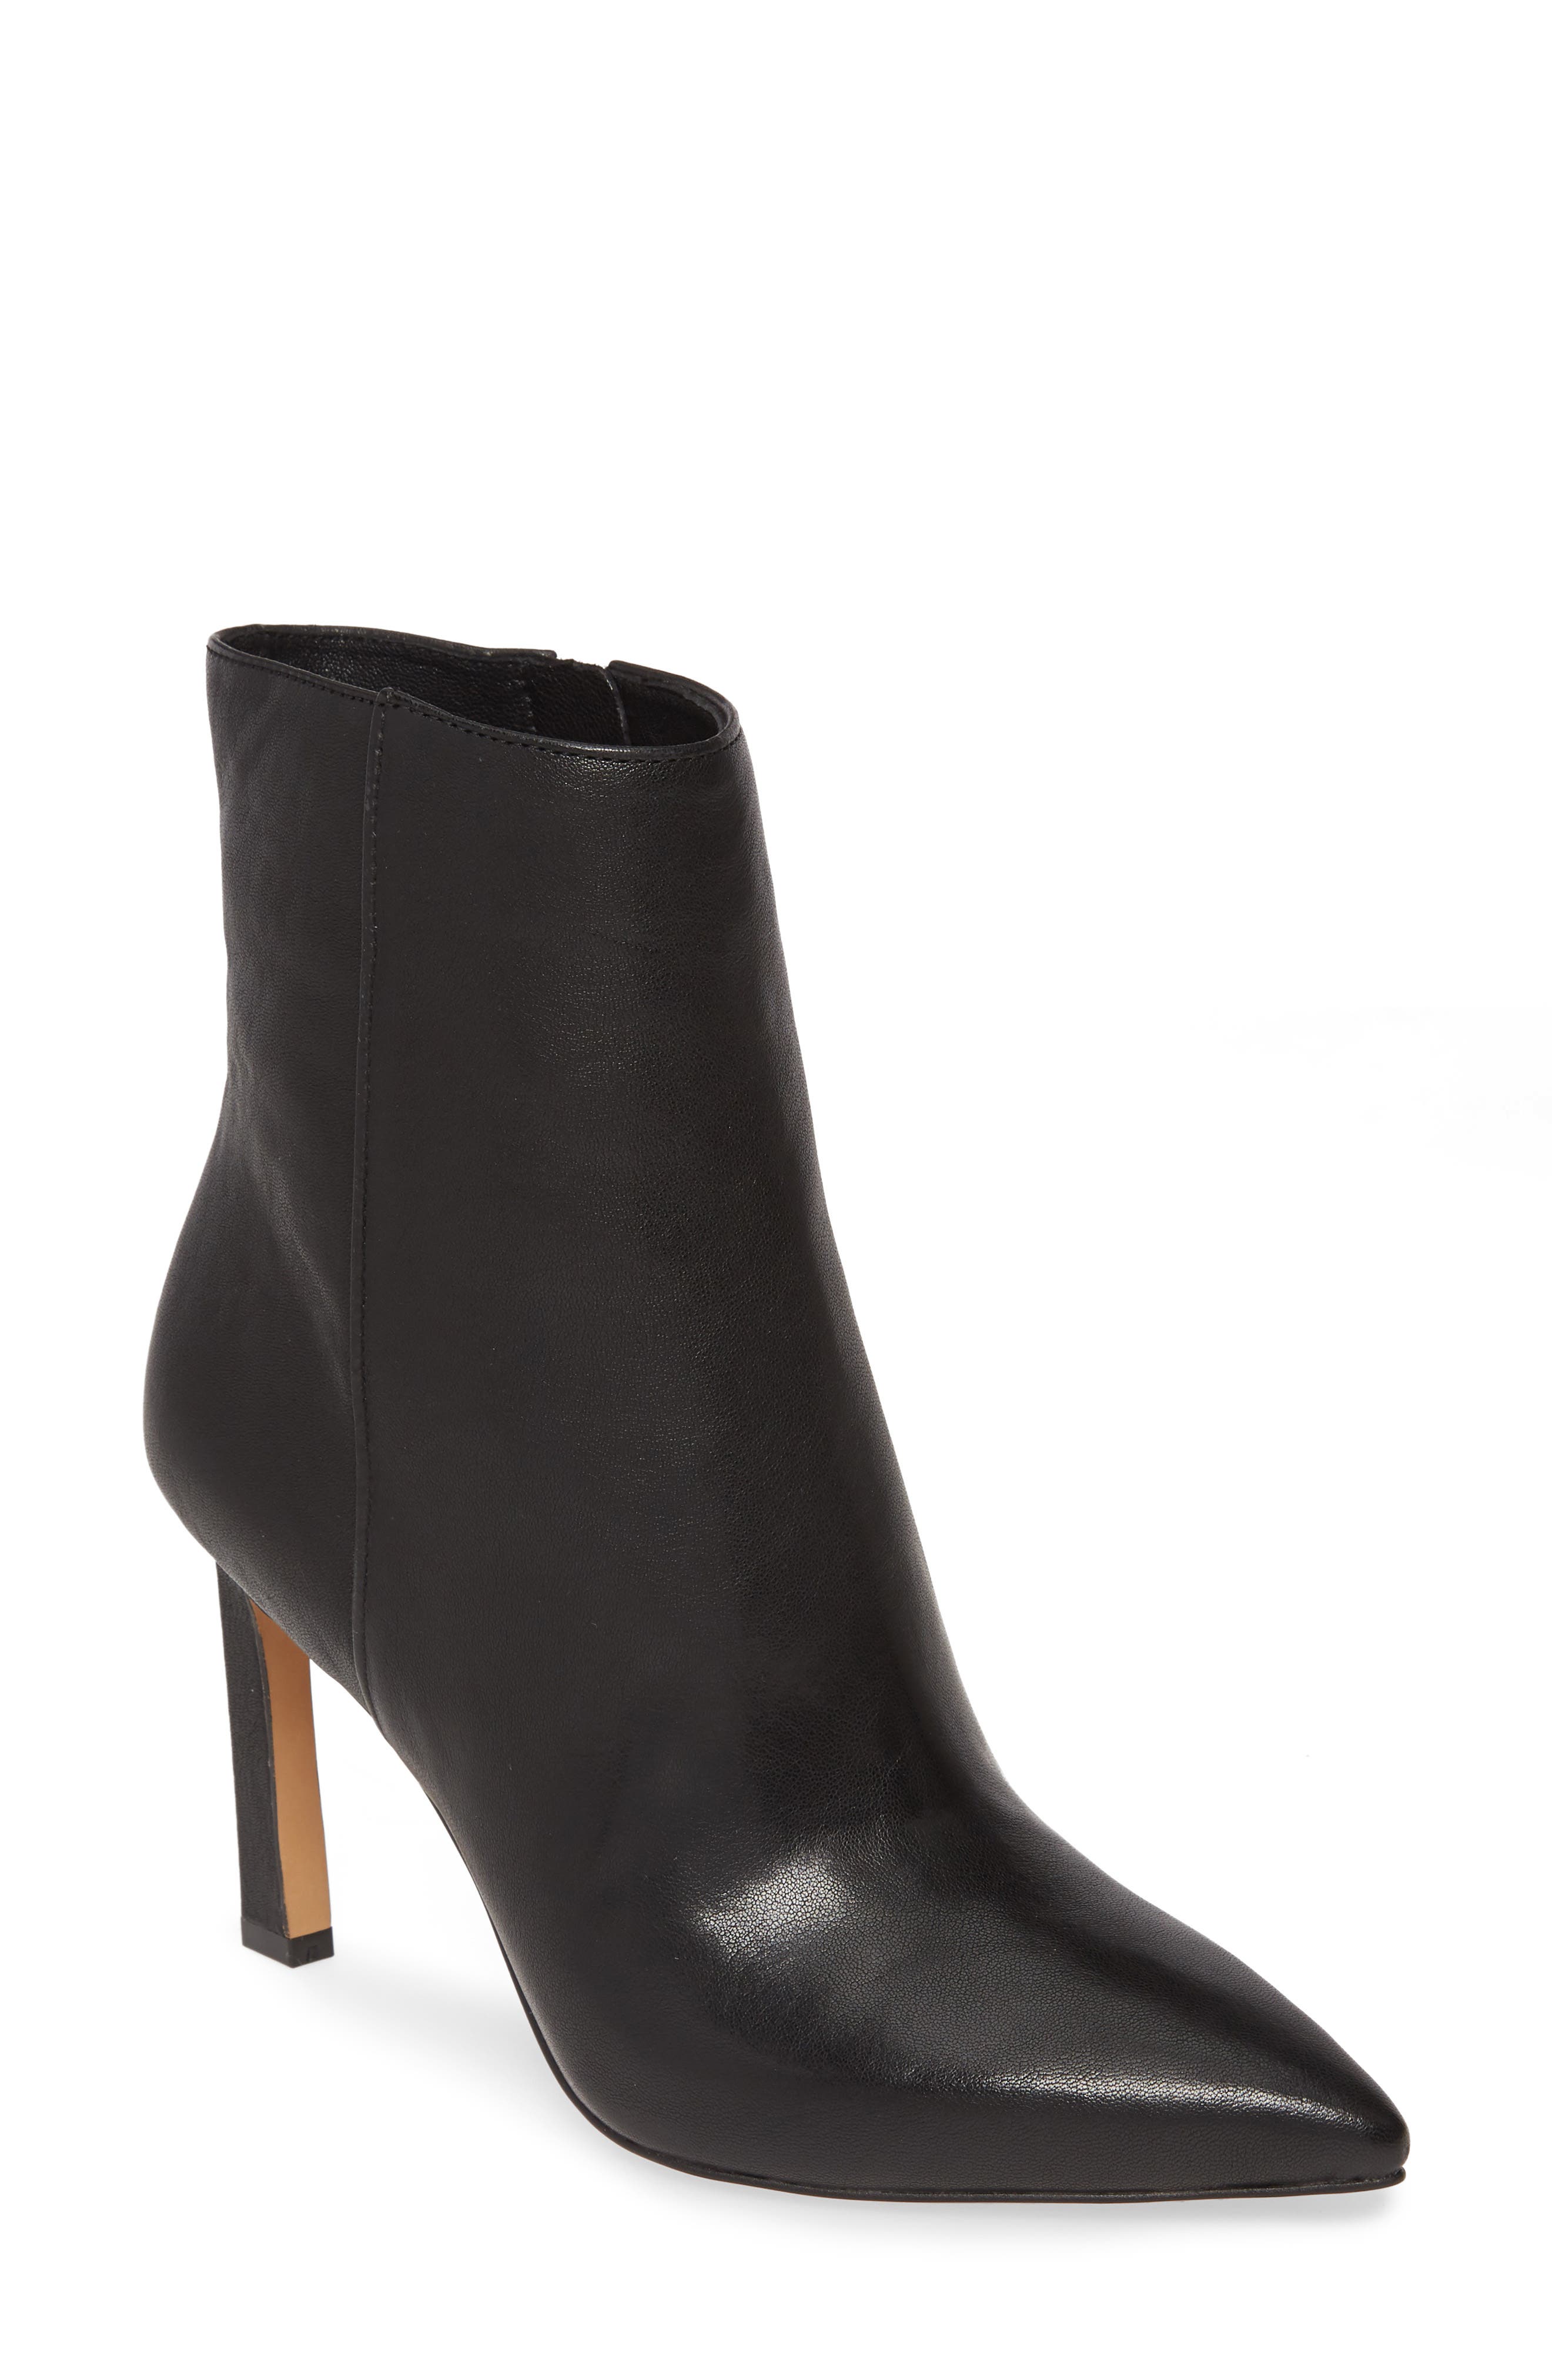 pointed toe black leather booties